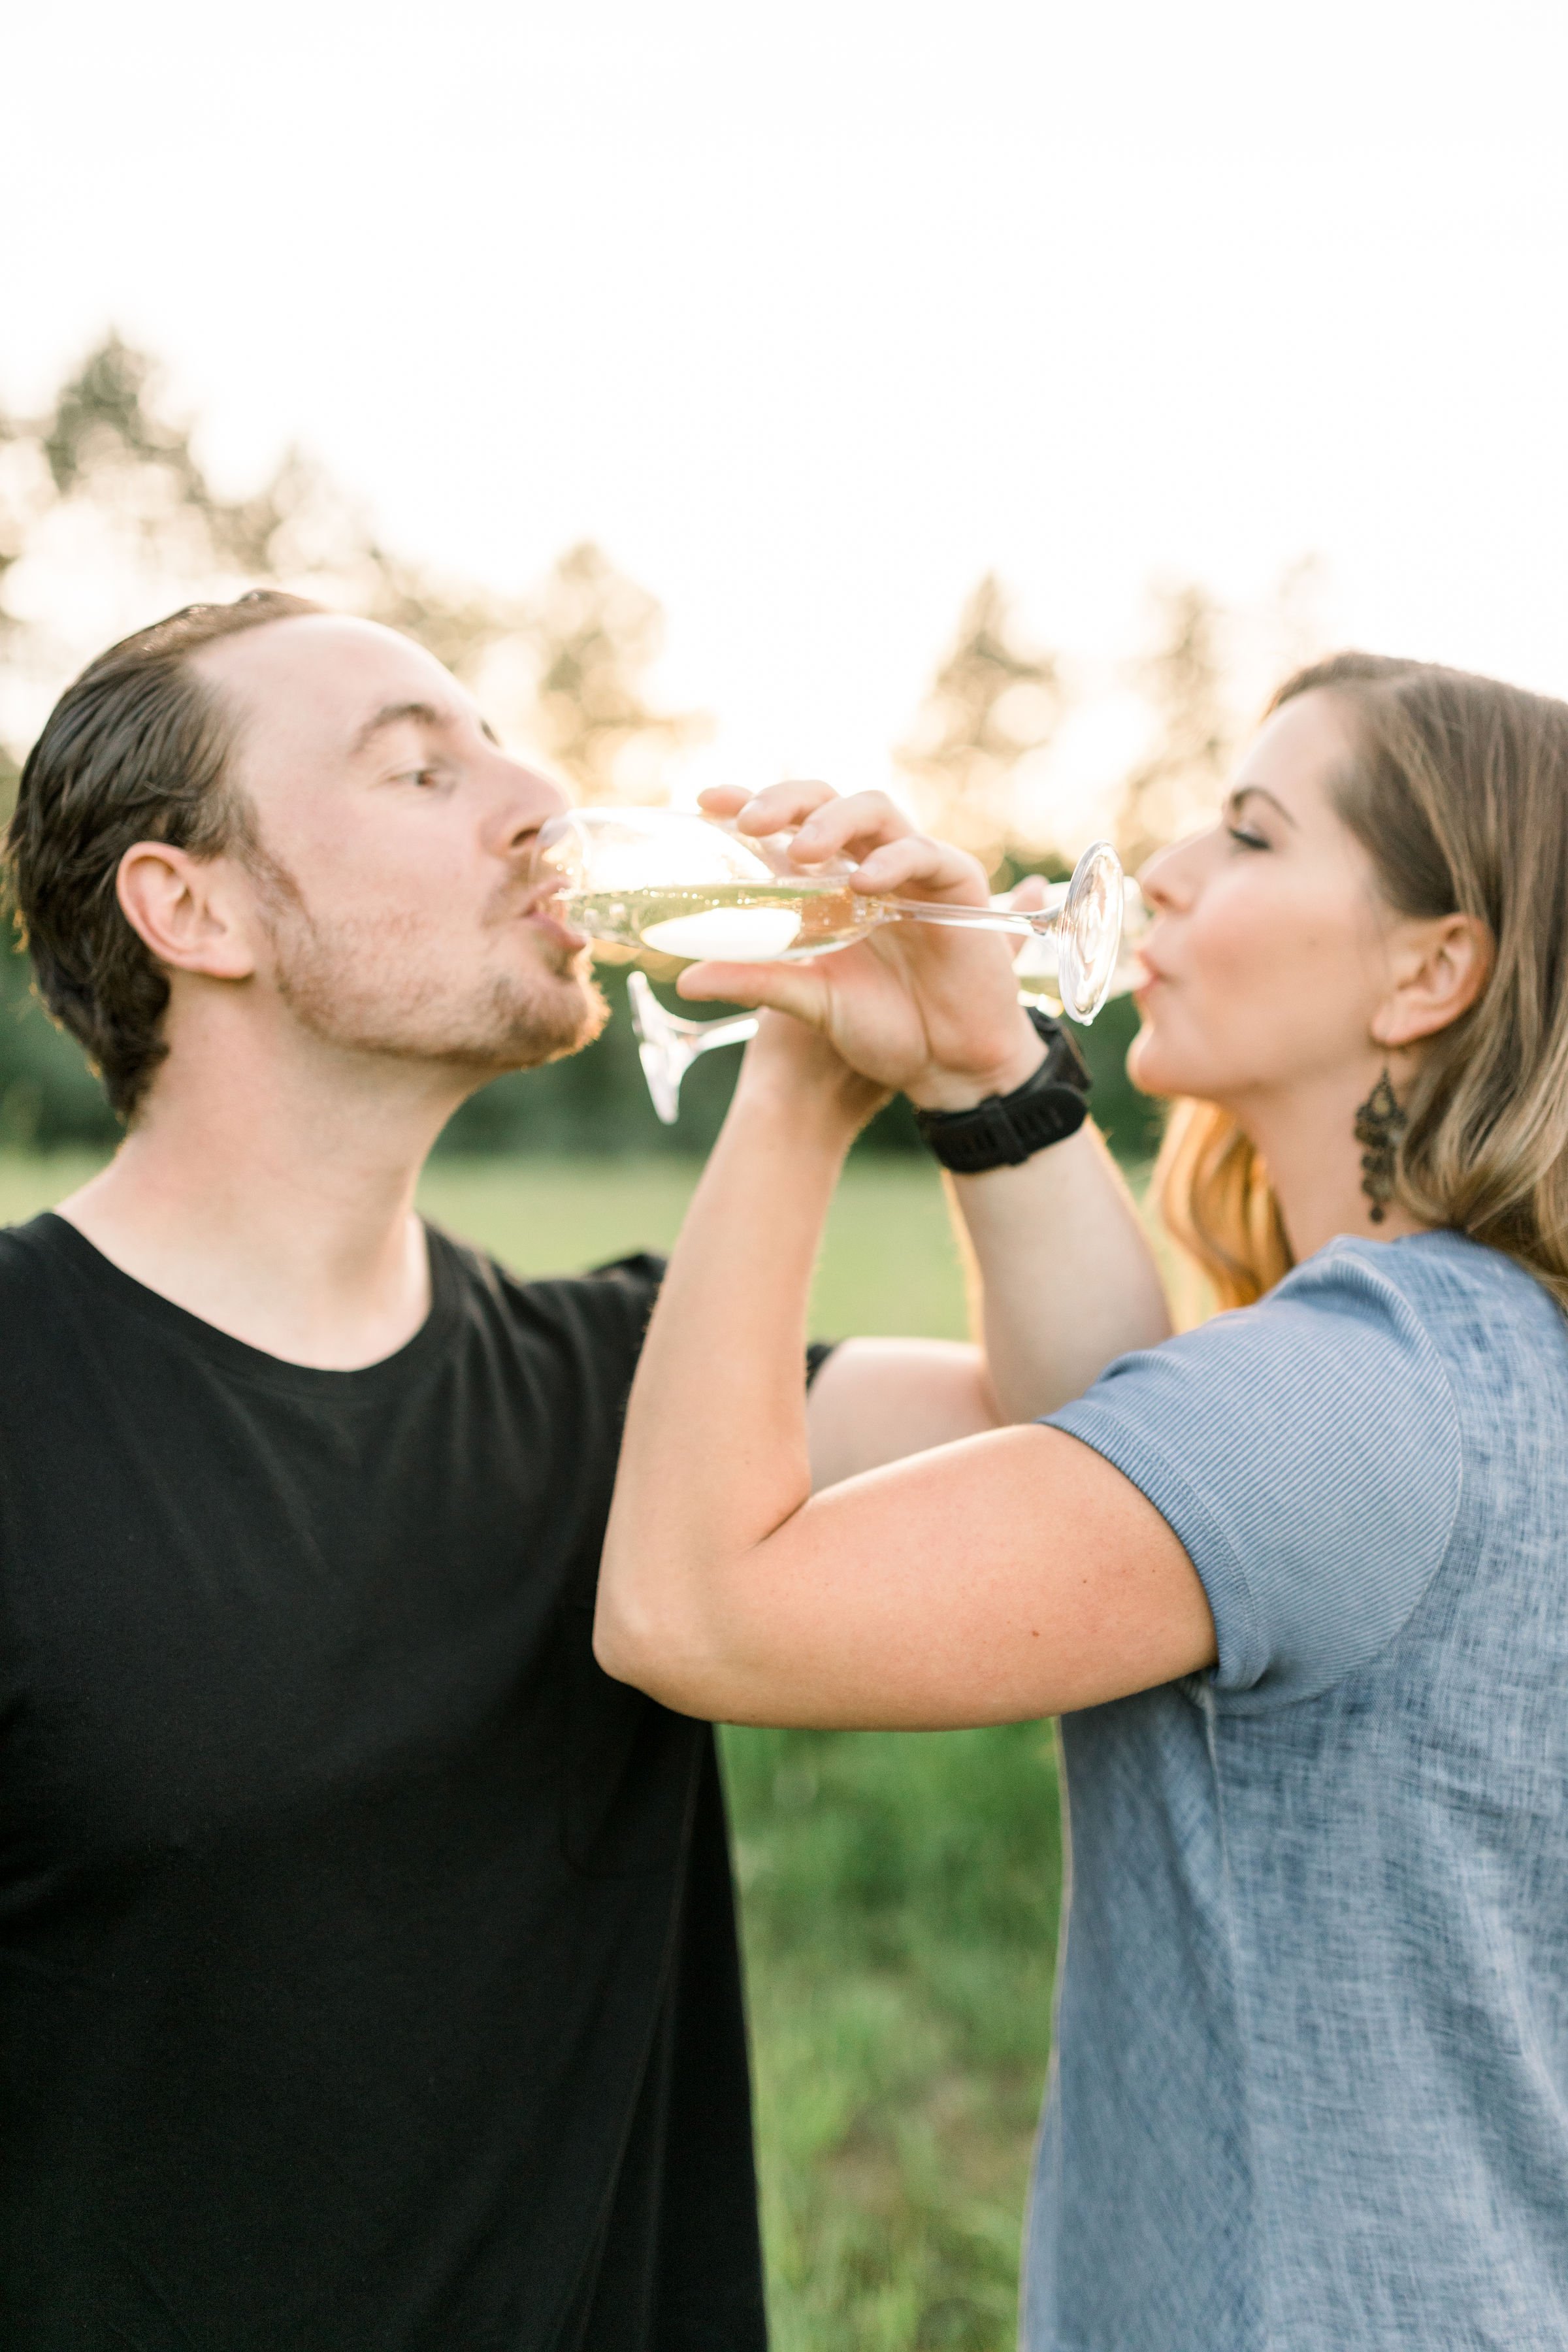  Chelsea Mason Photography captures an engaged couple toasting to their new life together. celebrating engagement toasting engagement #chelseamasonphotography #chelseamasonengagements #Ottawaengagments #Almonteengagementphotographer #outdoorengagment